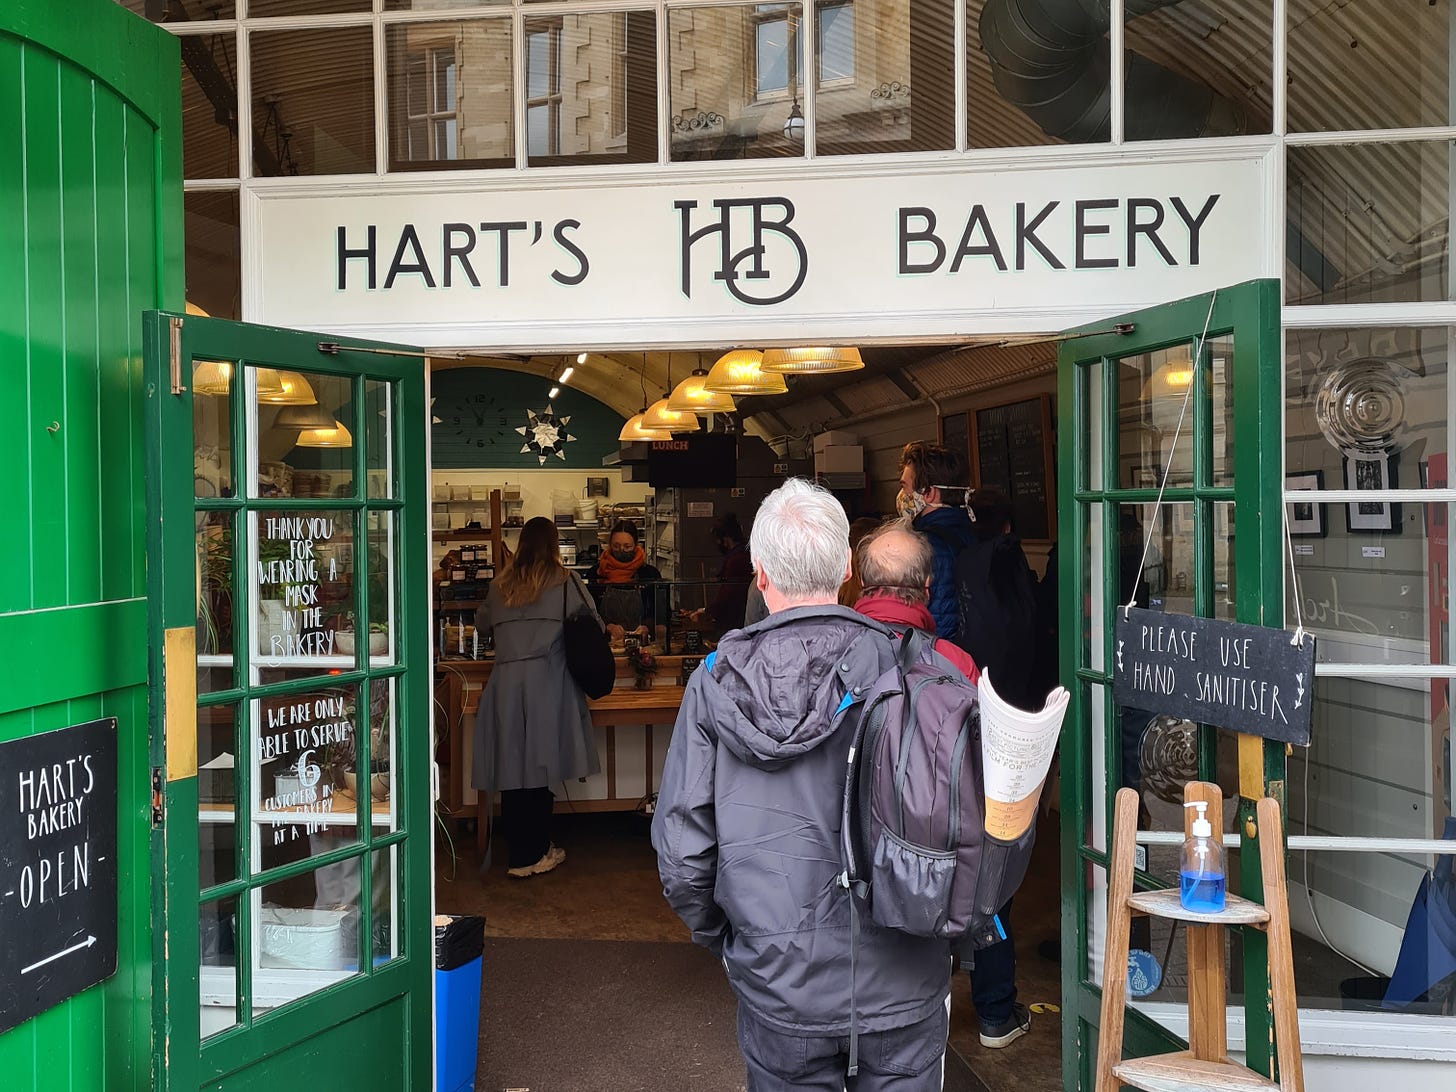 the entrace to hart's bakery